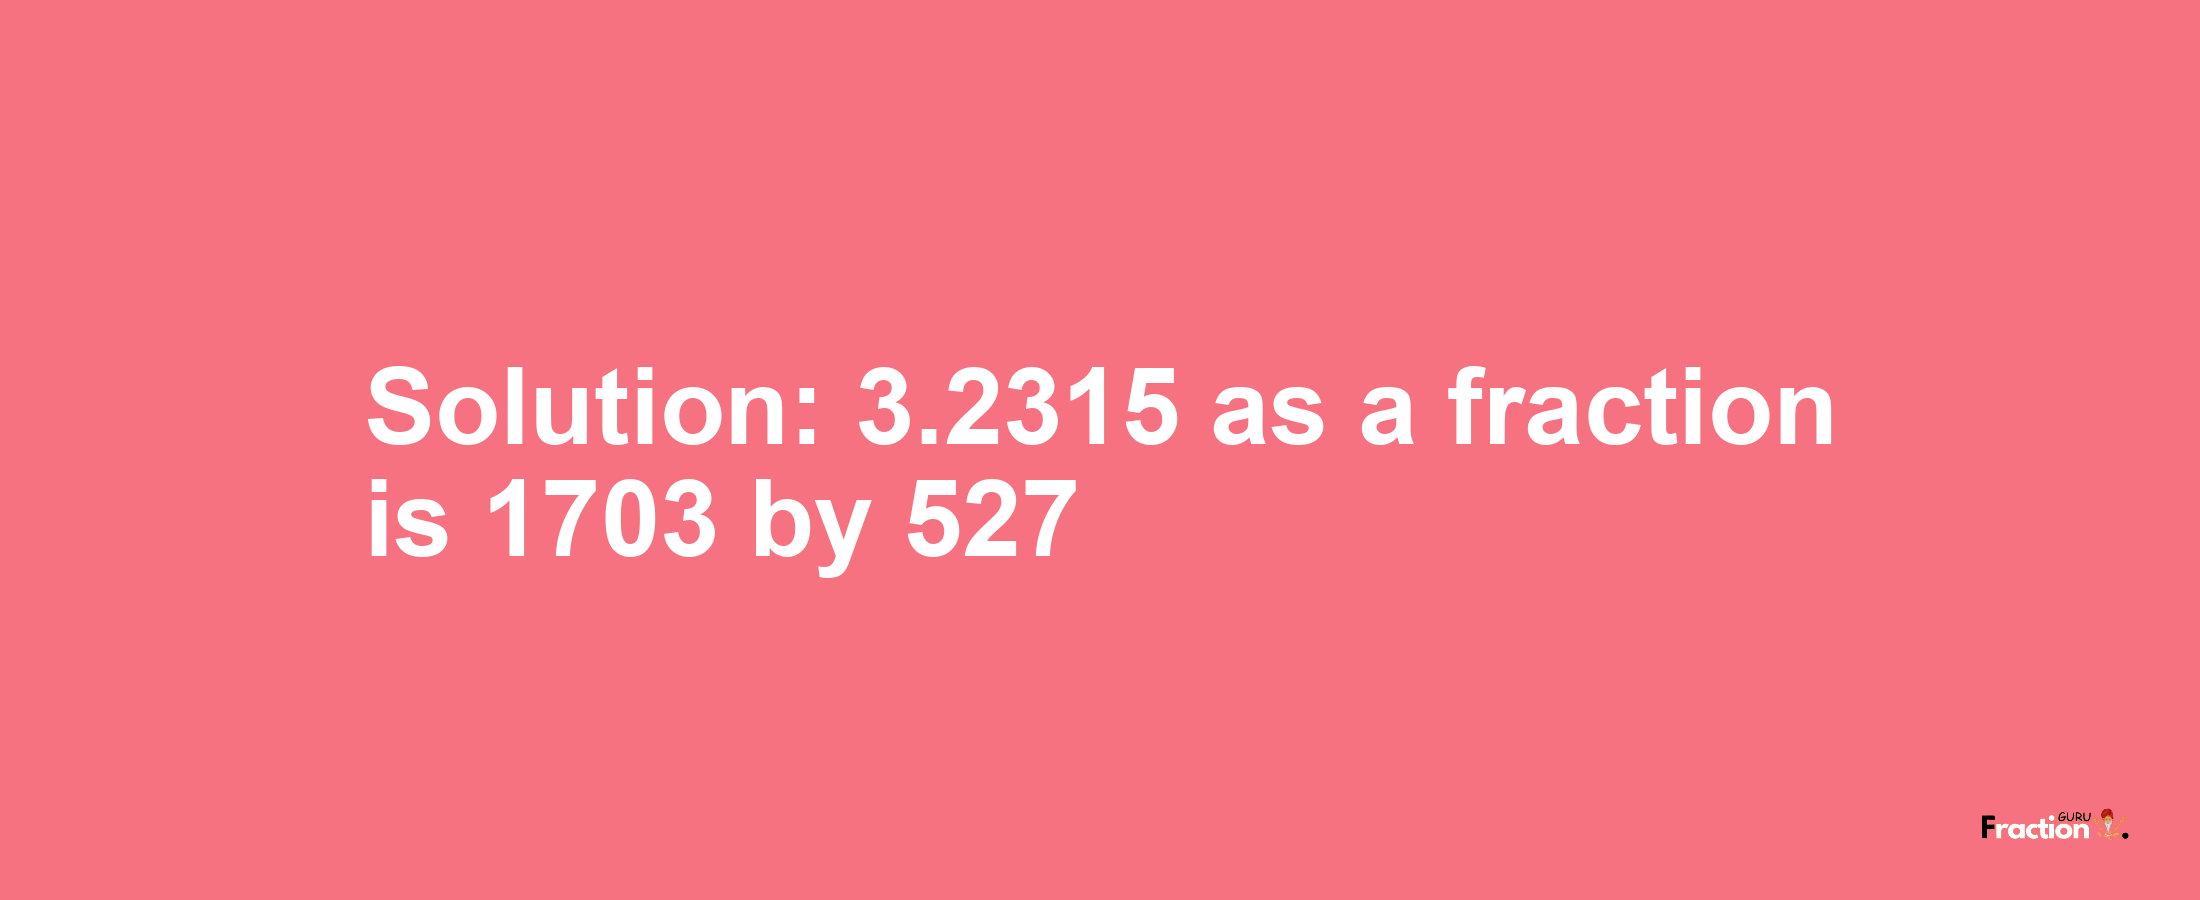 Solution:3.2315 as a fraction is 1703/527